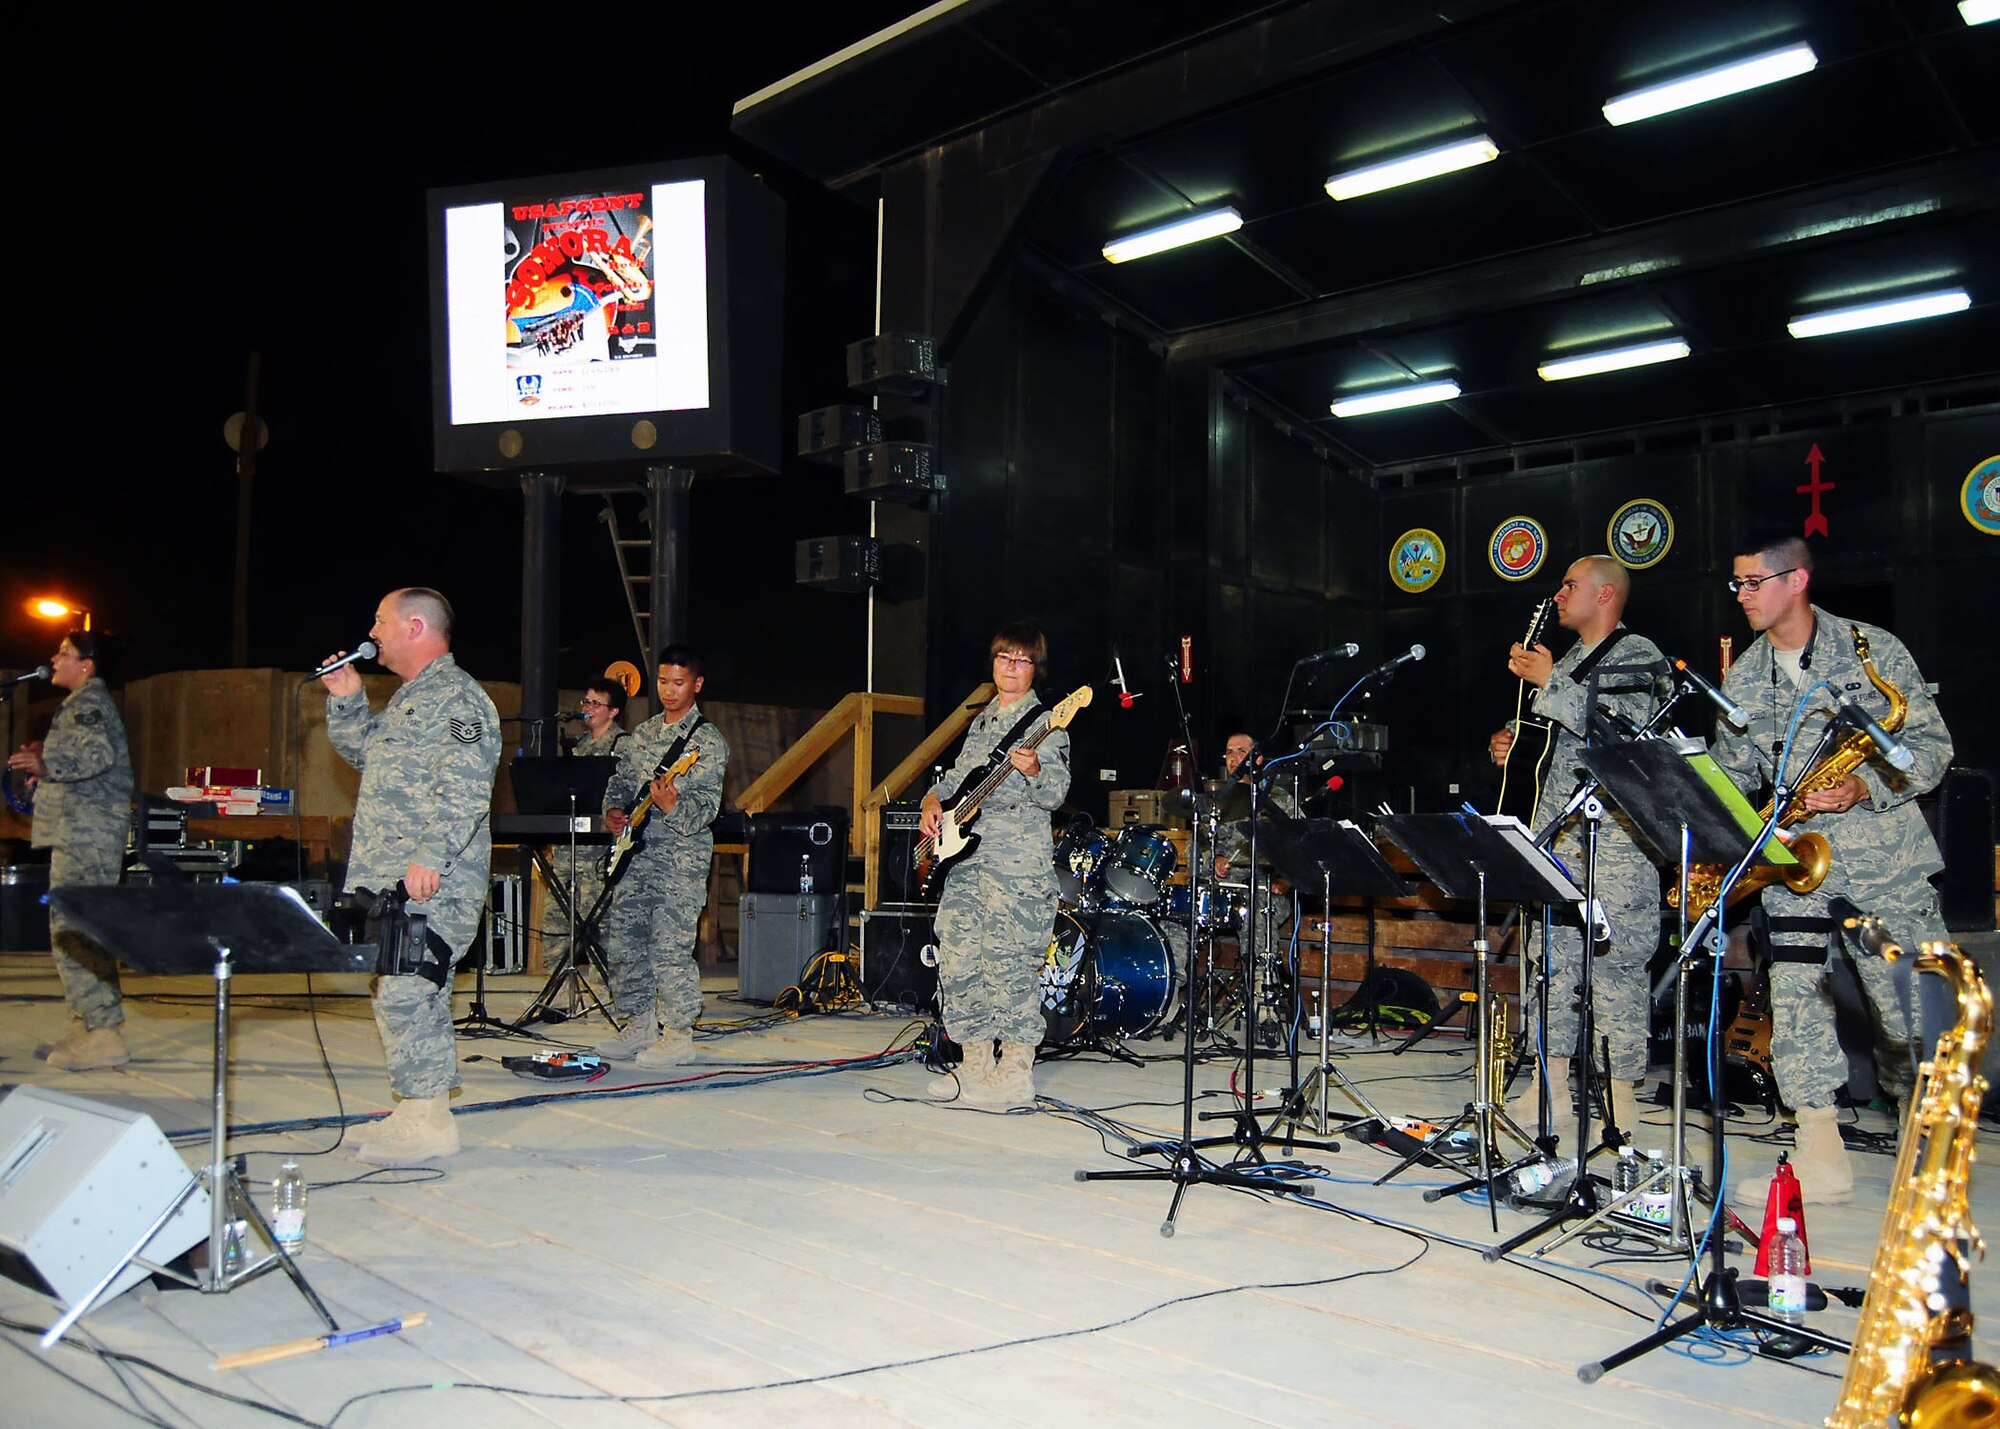 CAMP BUCCA, Iraq-- Air Force Central Command band Sonora perform for members of Camp Bucca, Iraq, during a performance on July 22.  Sonora offers a diverse performance repertoire featuring acoustic, electric and bass guitars, keyboards, drums, saxophone and trumpet.  Vocalists round-out the mix and an expert engineer brings it all together.  (U.S. Air Force photo/Tech Sgt. Tony Tolley)